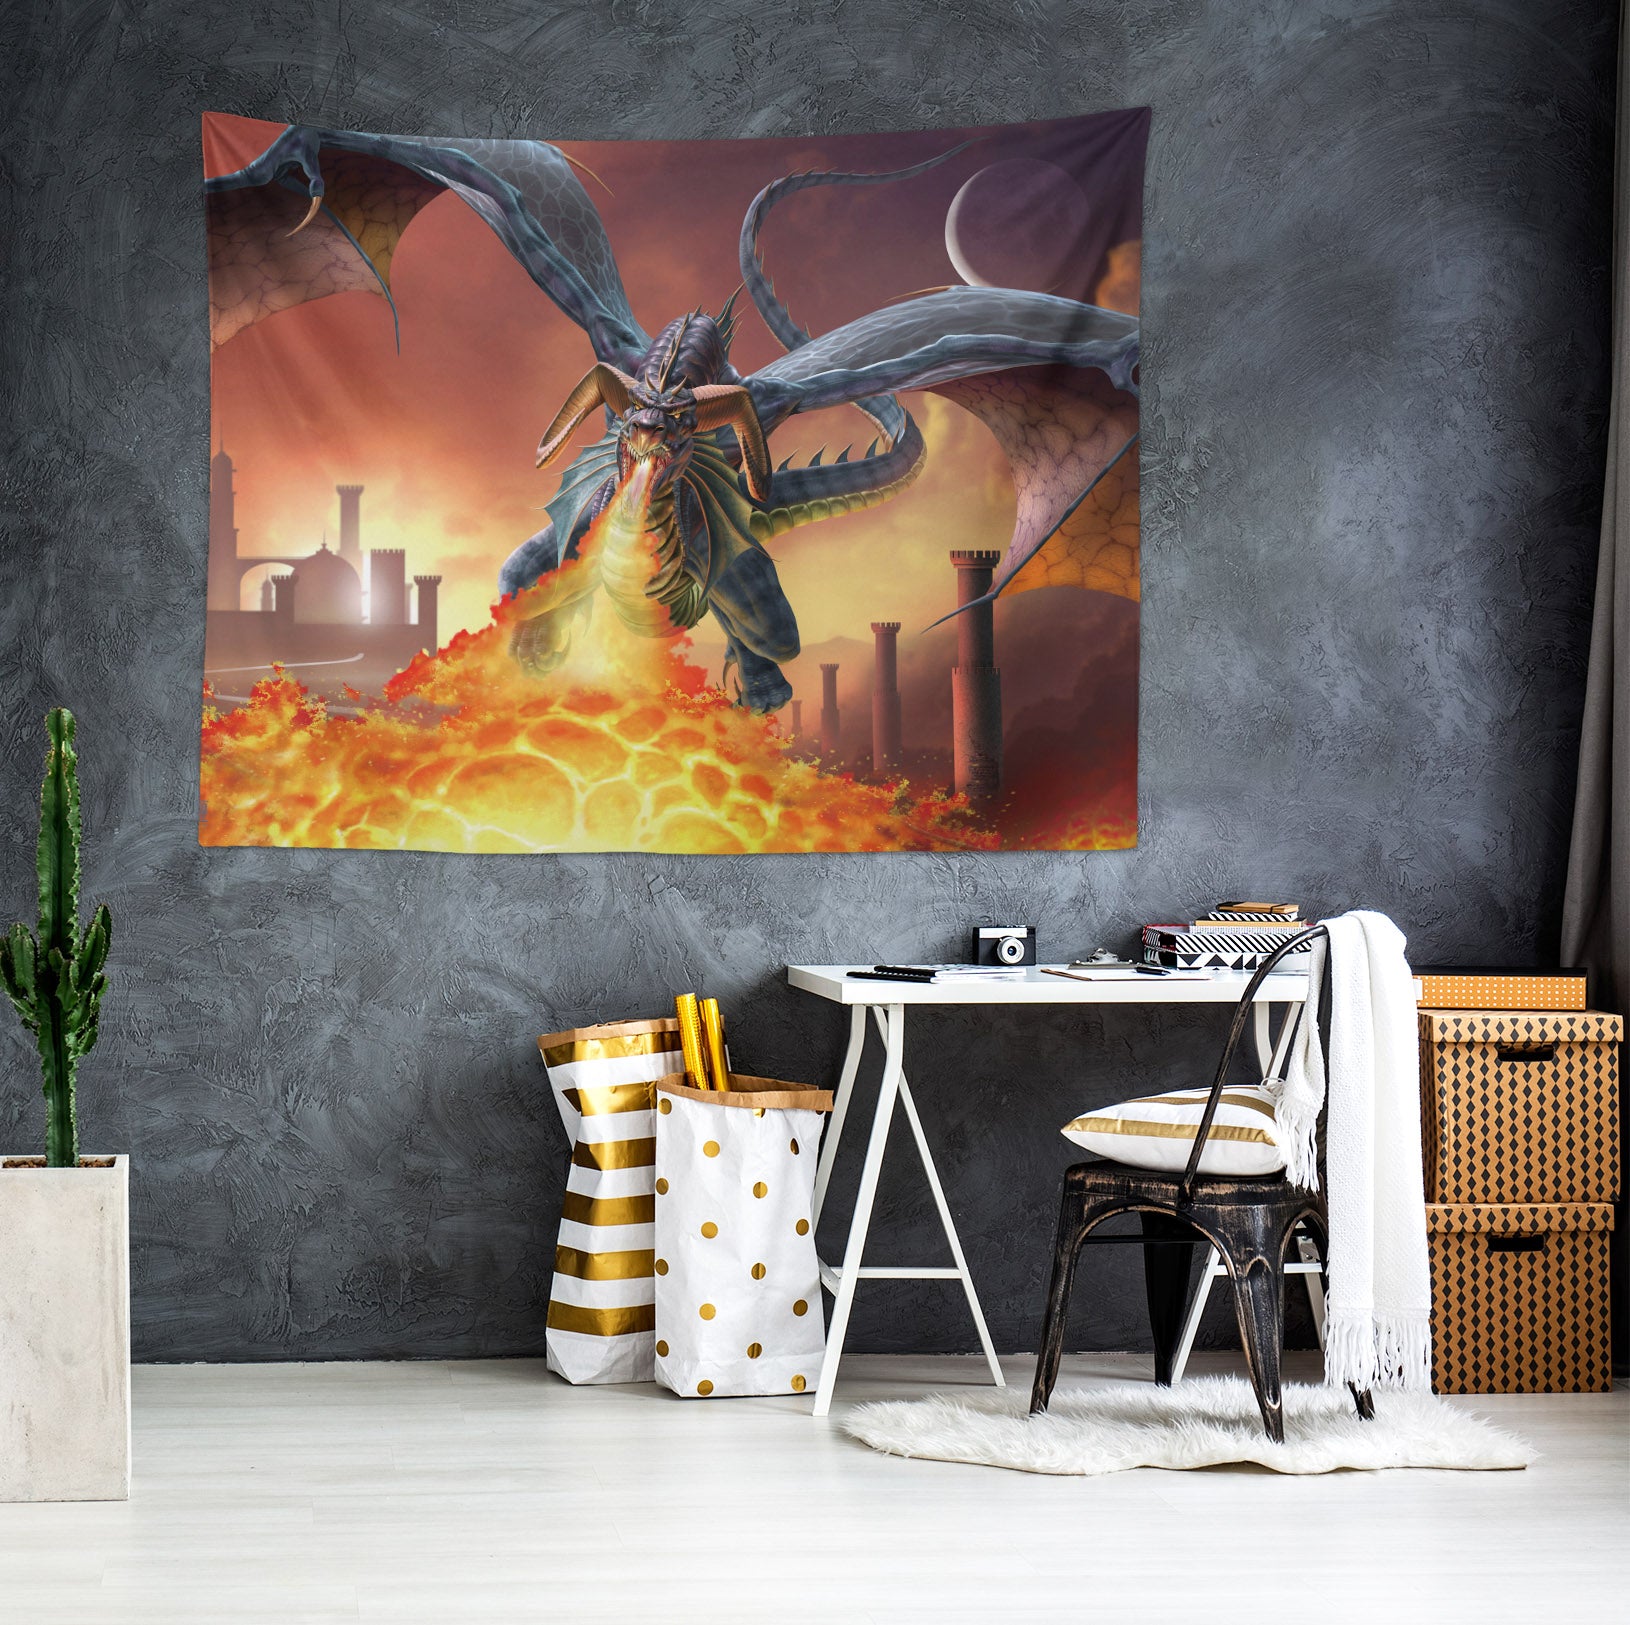 3D Fire-Breathing Dragon 121203 Tom Wood Tapestry Hanging Cloth Hang